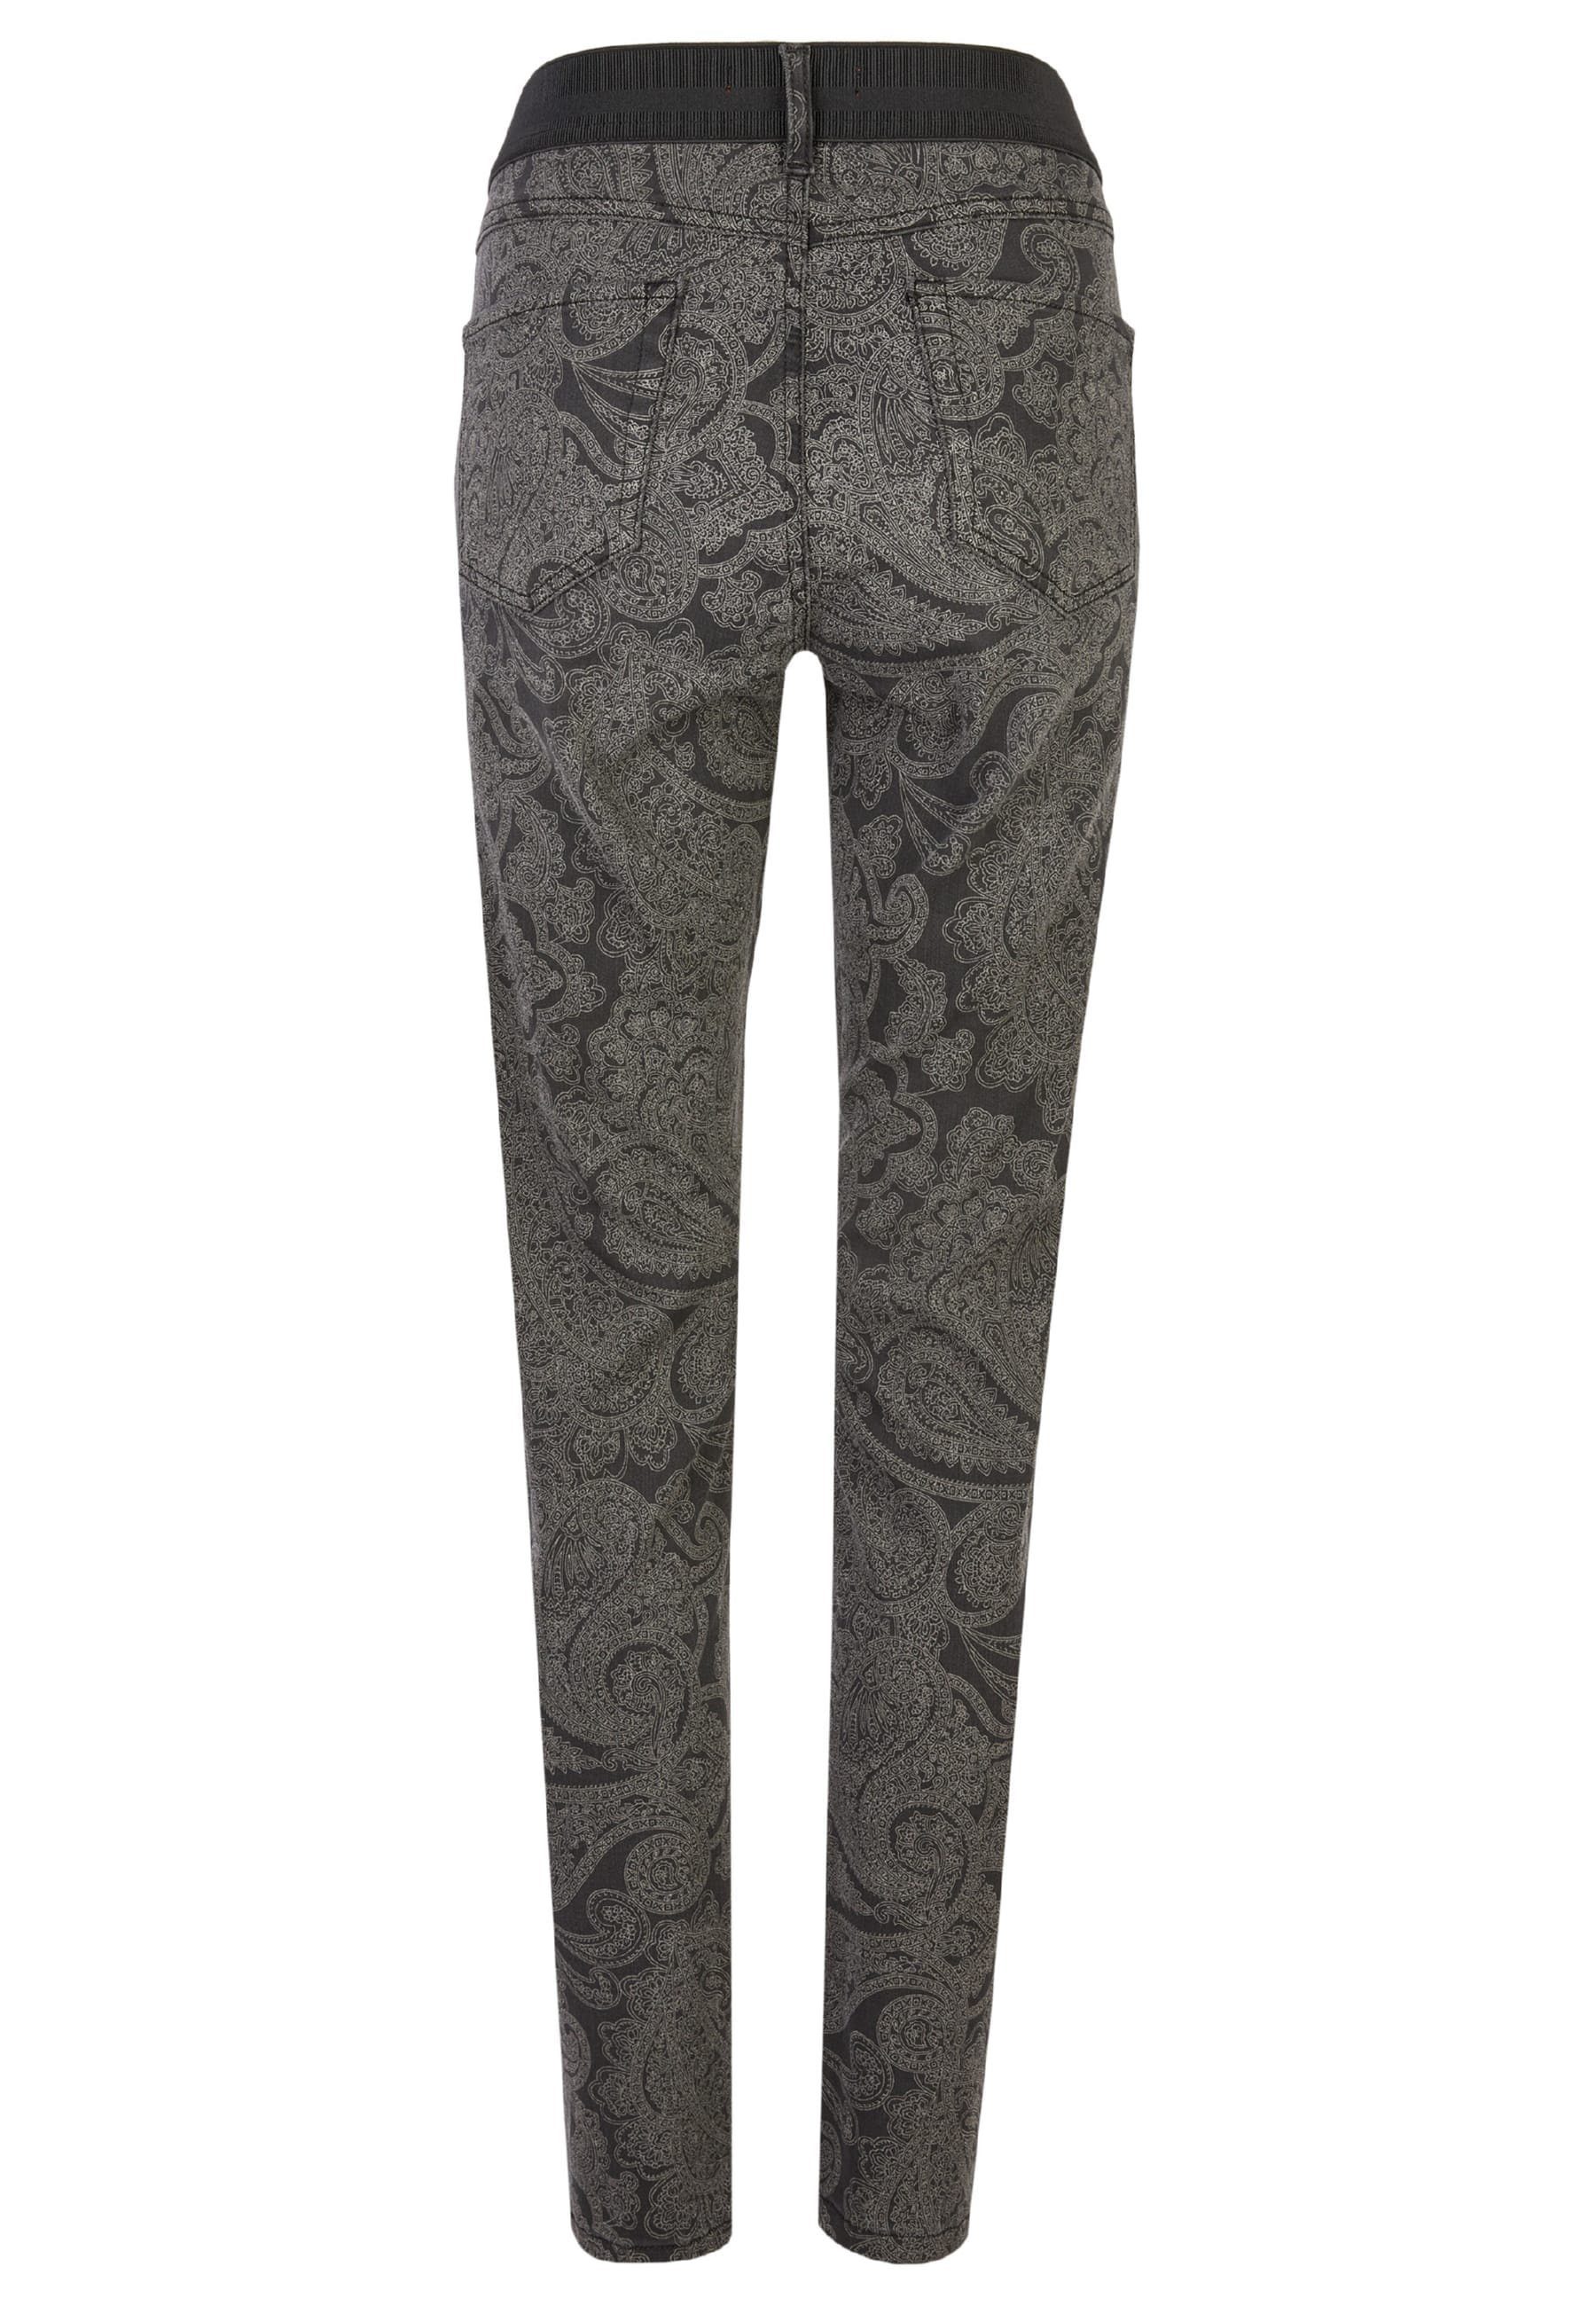 anthrazit mit Slim-fit-Jeans Size mit One Label-Applikationen ANGELS Paisley-Muster Jeans